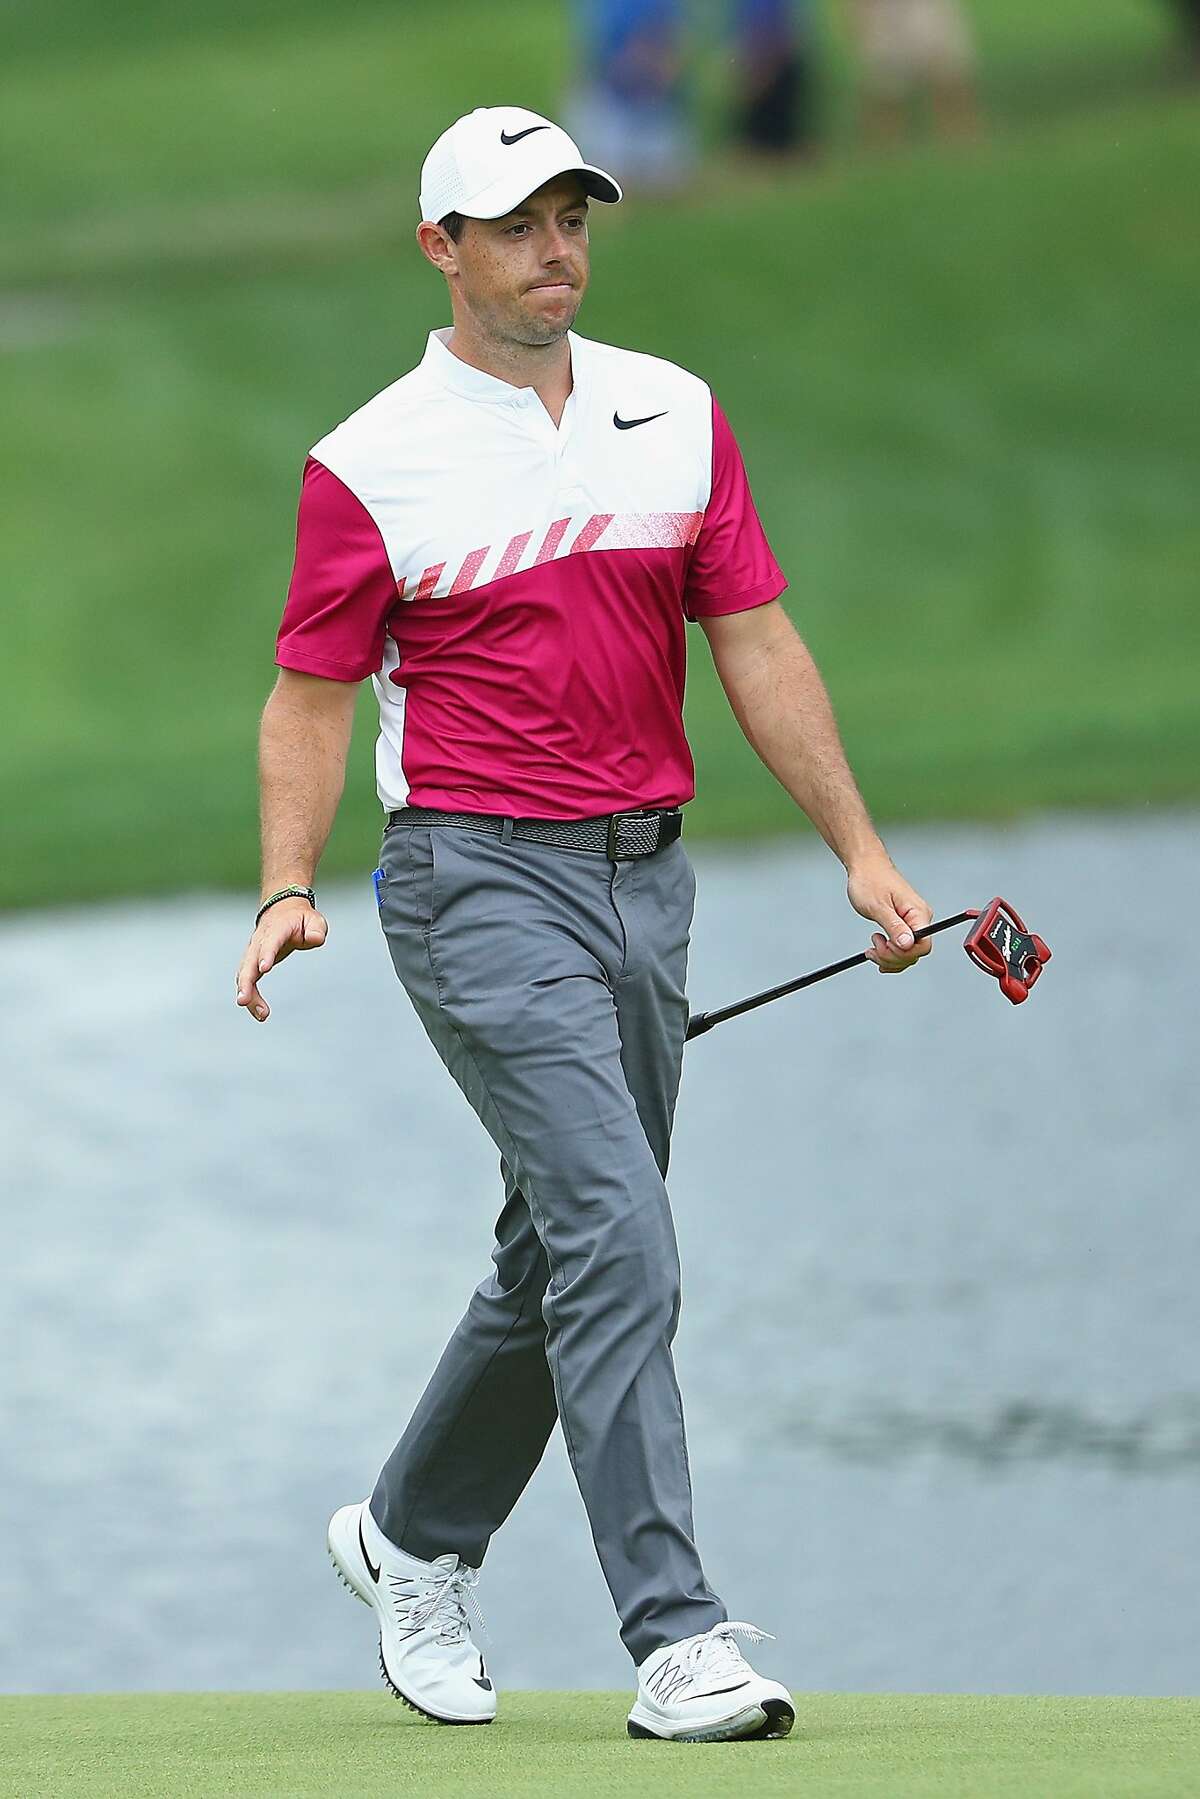 CROMWELL, CT - JUNE 23: Rory McIlroy of Northern Ireland walks on the 13th hole during the second round of the Travelers Championship at TPC River Highlands on June 23, 2017 in Cromwell, Connecticut. (Photo by Maddie Meyer/Getty Images)